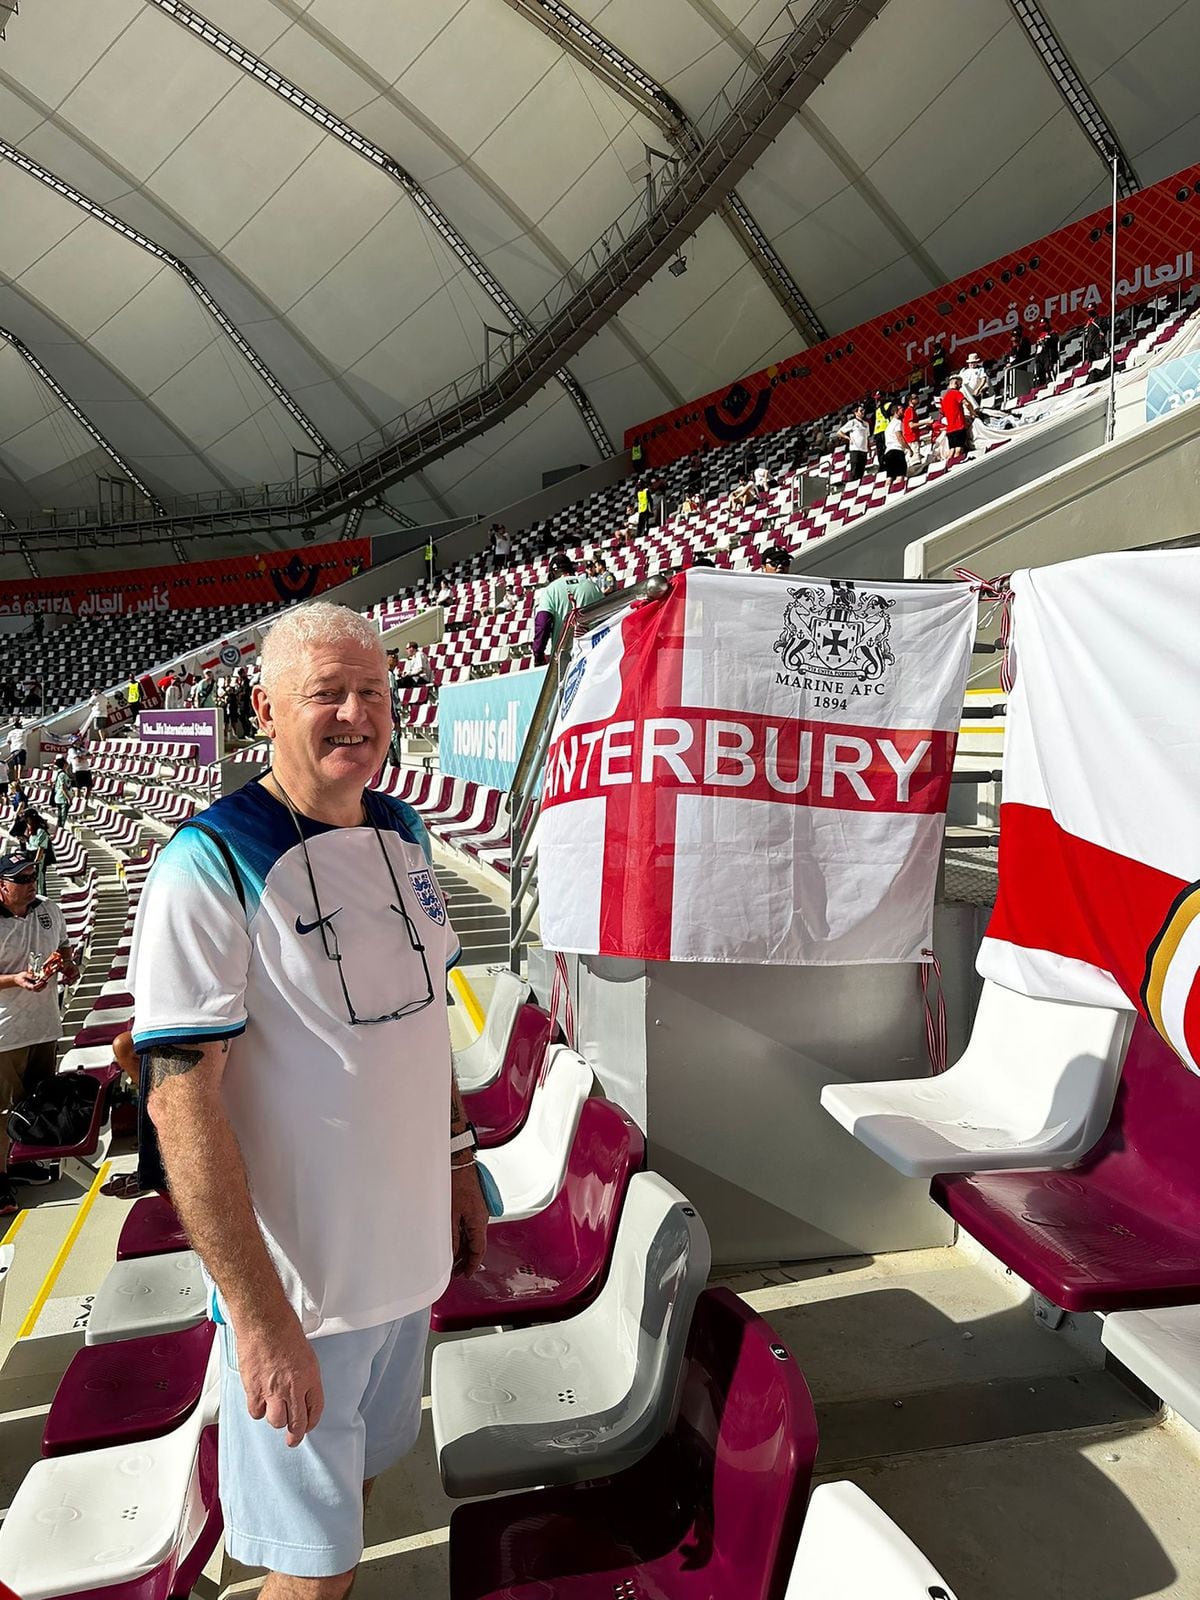               BEST QUALITY AVAILABLEUndated handout photo issued by David Thompson, 61, at FIFA World Cup 2022 held in Qatar. Mr Thompson who is an England fan, attended the 1966 World Cup win is hoping to witness a repeat in Qatar 56 years later. David Thompson has followed the Three Lions at four overseas World Cups although his first experience of international football's biggest tournament came as a five-year-old. Issue date: Tuesday December 6, 2022. PA Photo. See PA story SPORT WorldCup . Photo credit should read: David Thompson/PA Wire NOTE TO EDITORS: This handout photo may only be used in for editorial reporting purposes for the contemporaneous illustration of events, things or the people in the image or facts mentioned in the caption. Reuse of the picture may require further permission from the copyright holder.            